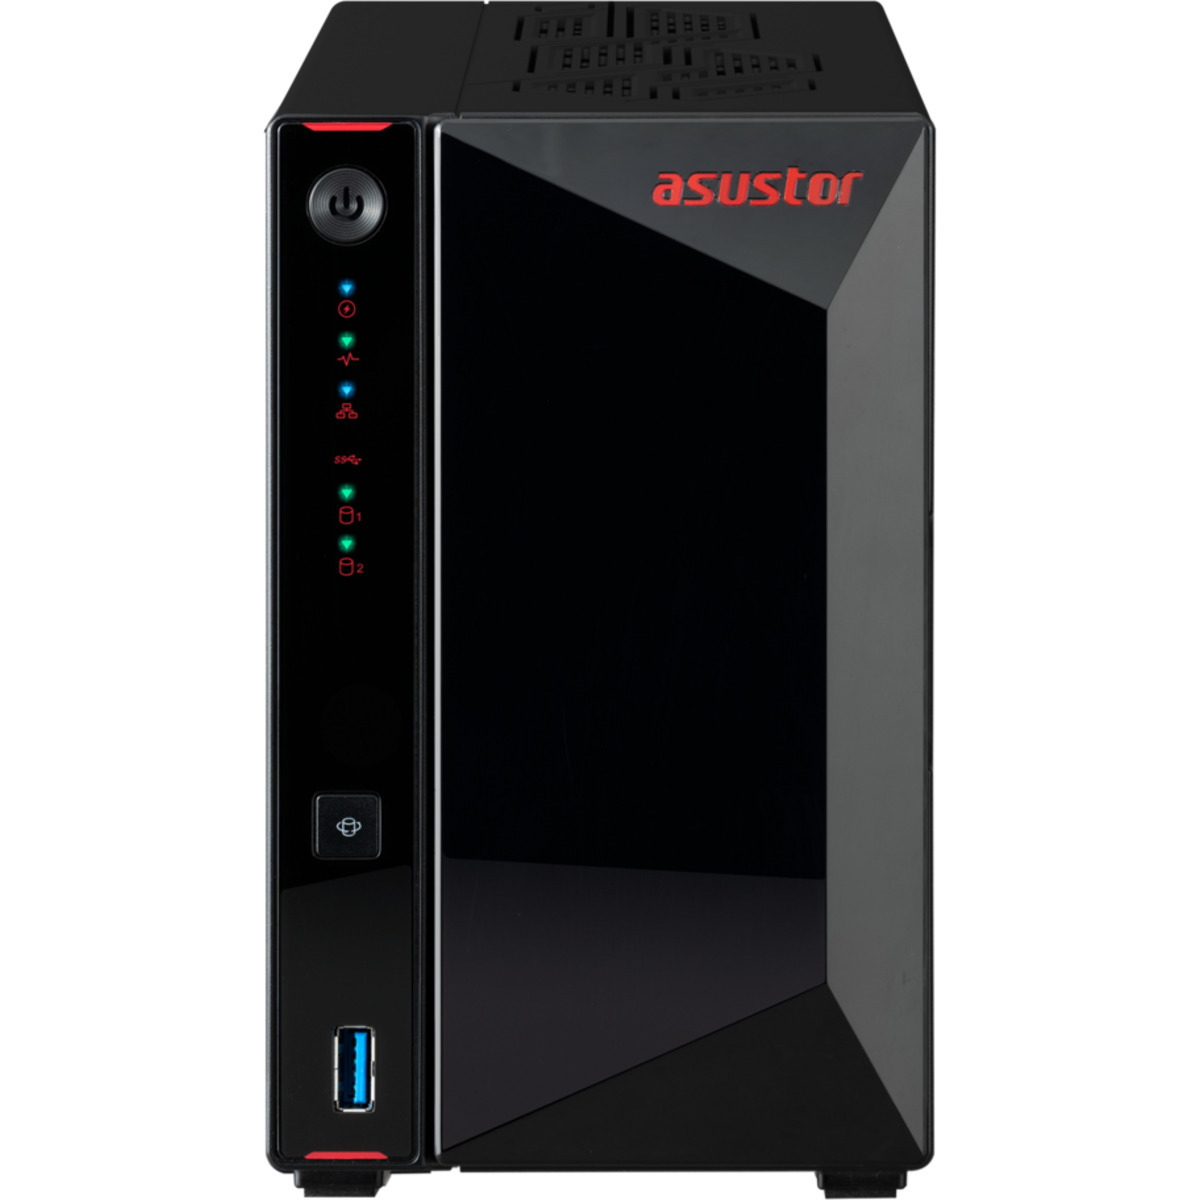 ASUSTOR Nimbustor 2 Gen2 AS5402T 20tb 2-Bay Desktop Multimedia / Power User / Business NAS - Network Attached Storage Device 1x20tb Western Digital Red Pro WD201KFGX 3.5 7200rpm SATA 6Gb/s HDD NAS Class Drives Installed - Burn-In Tested - FREE RAM UPGRADE Nimbustor 2 Gen2 AS5402T